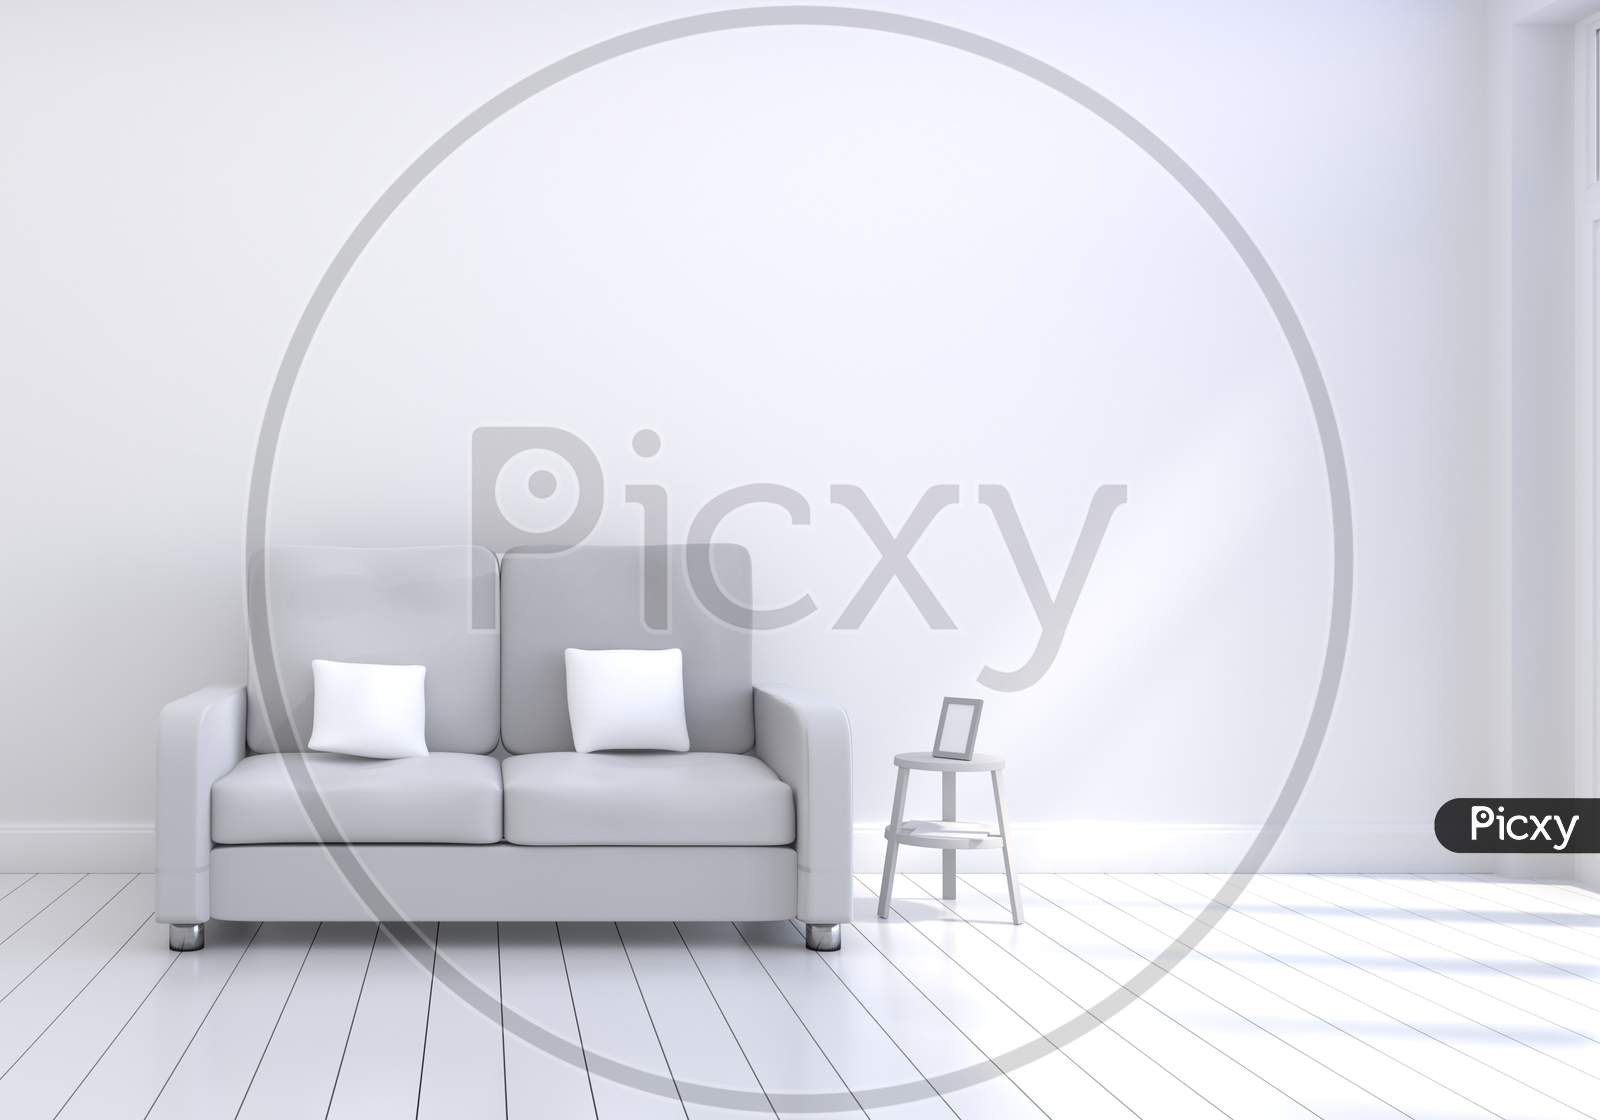 Modern Interior Design Of Living Room With Grey Sofa With White And Wooden Glossy Floor And Photo Frame. White Cushions Elements. Home And Living Concept. Lifestyle Theme. 3D Illustration Rendering.